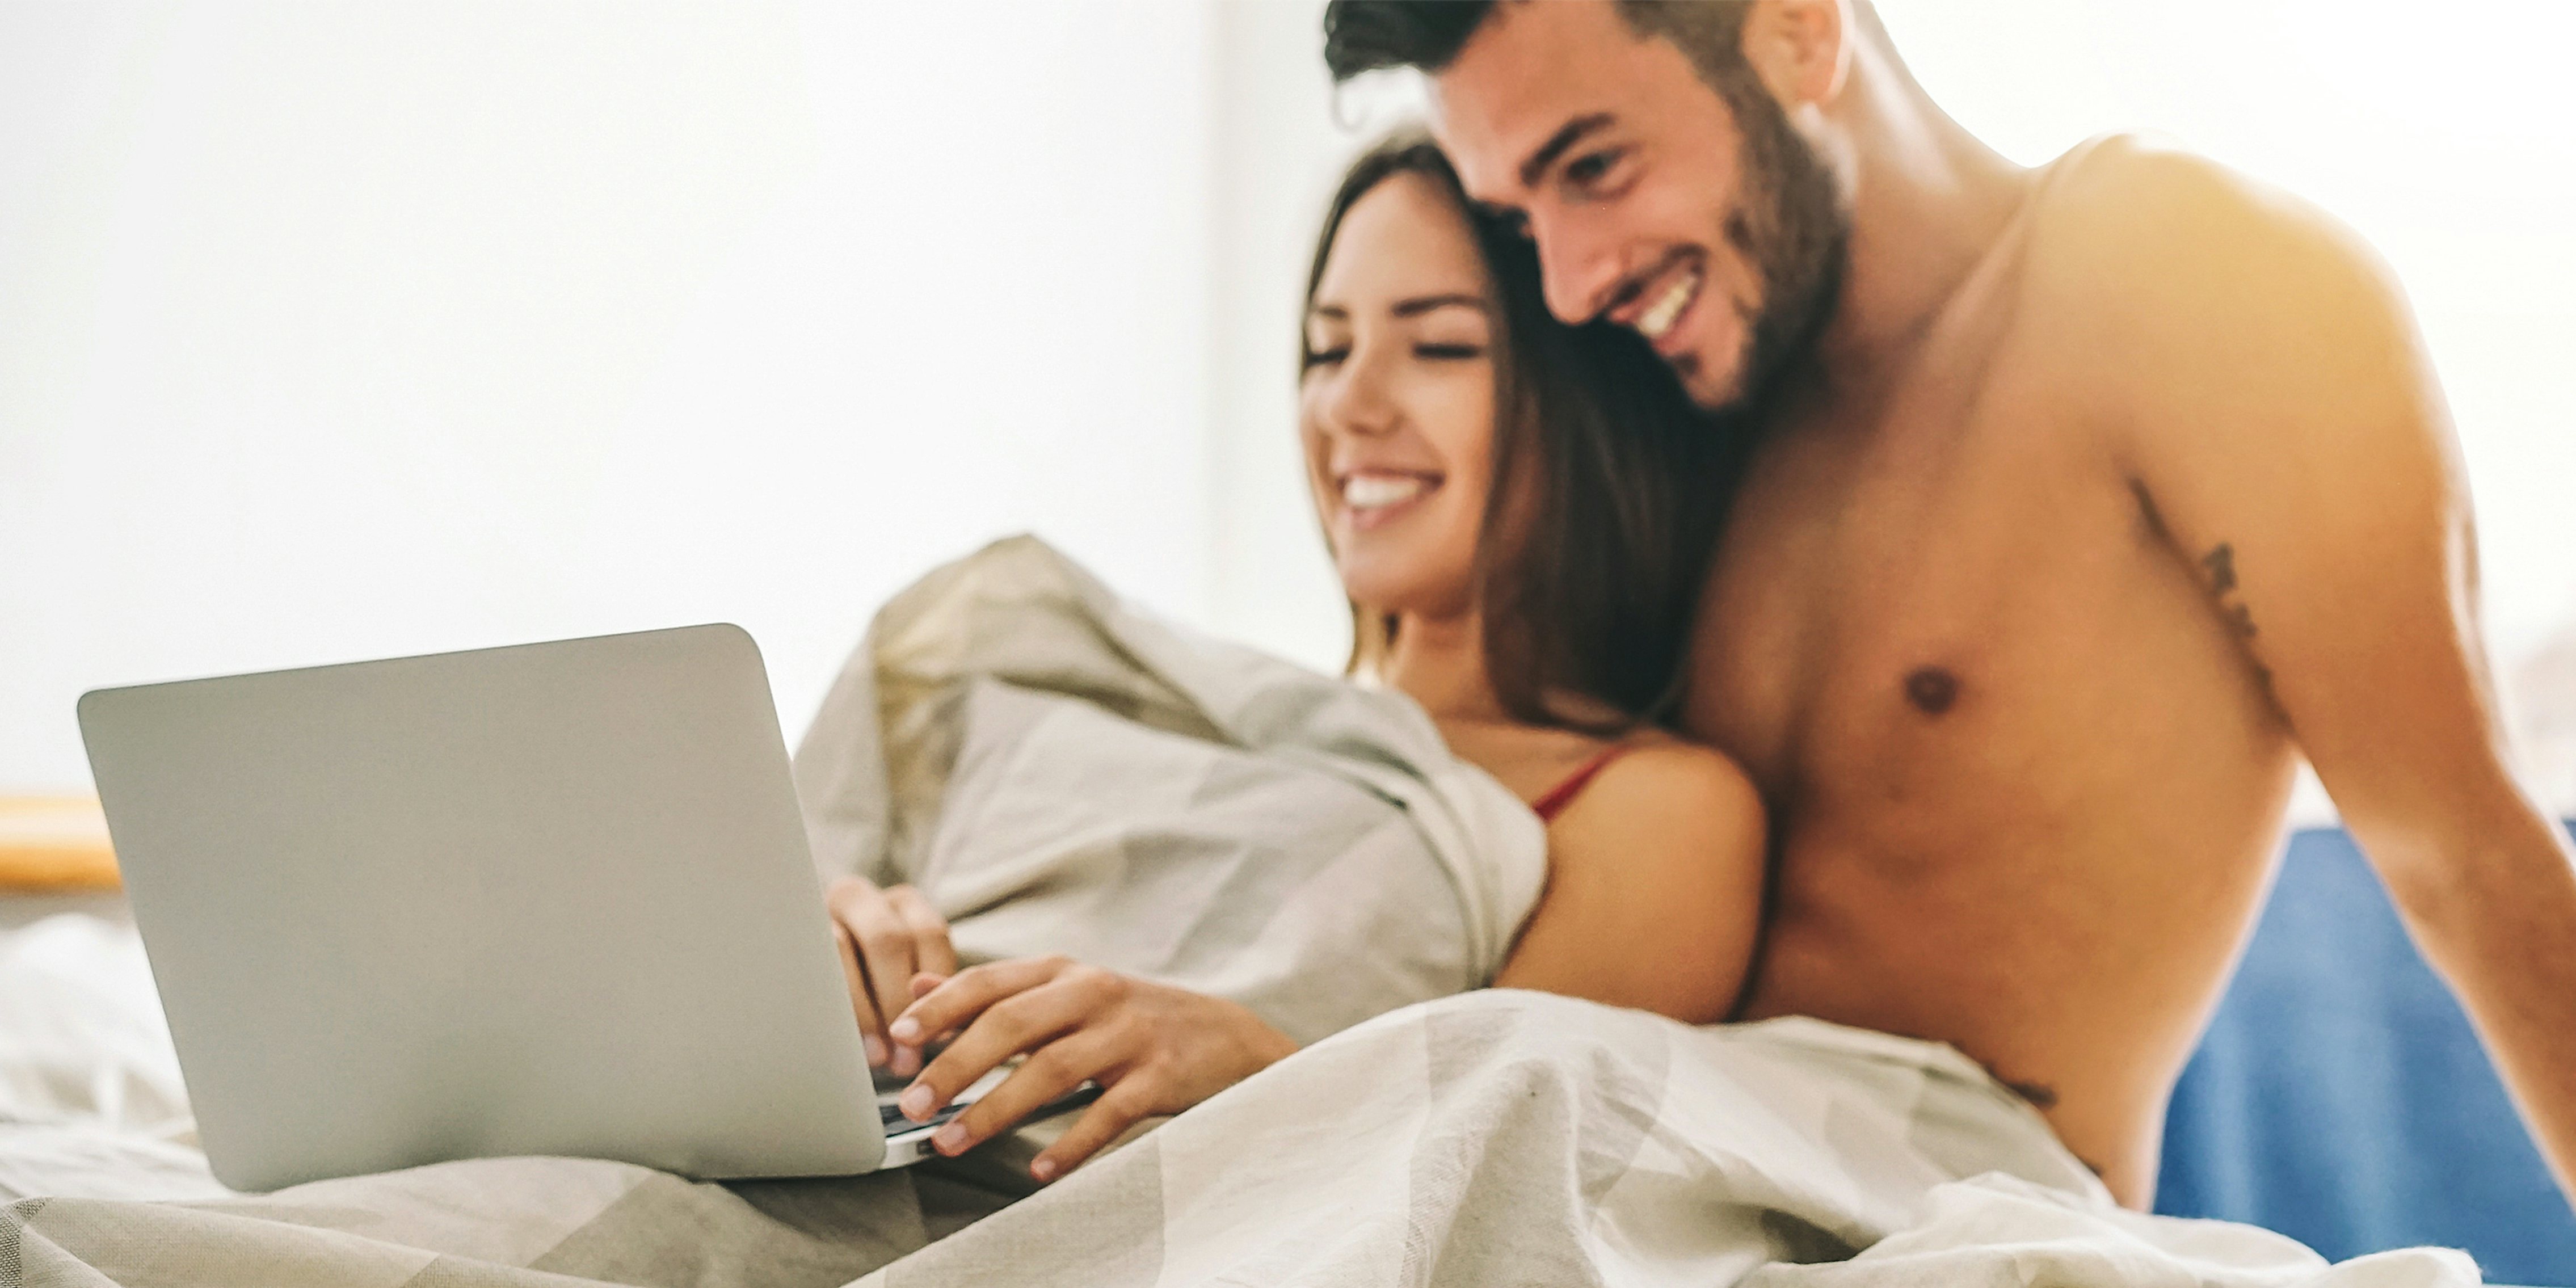 4540px x 2270px - Porn For Couples: The Best Couple Porn to Watch and Explore Together